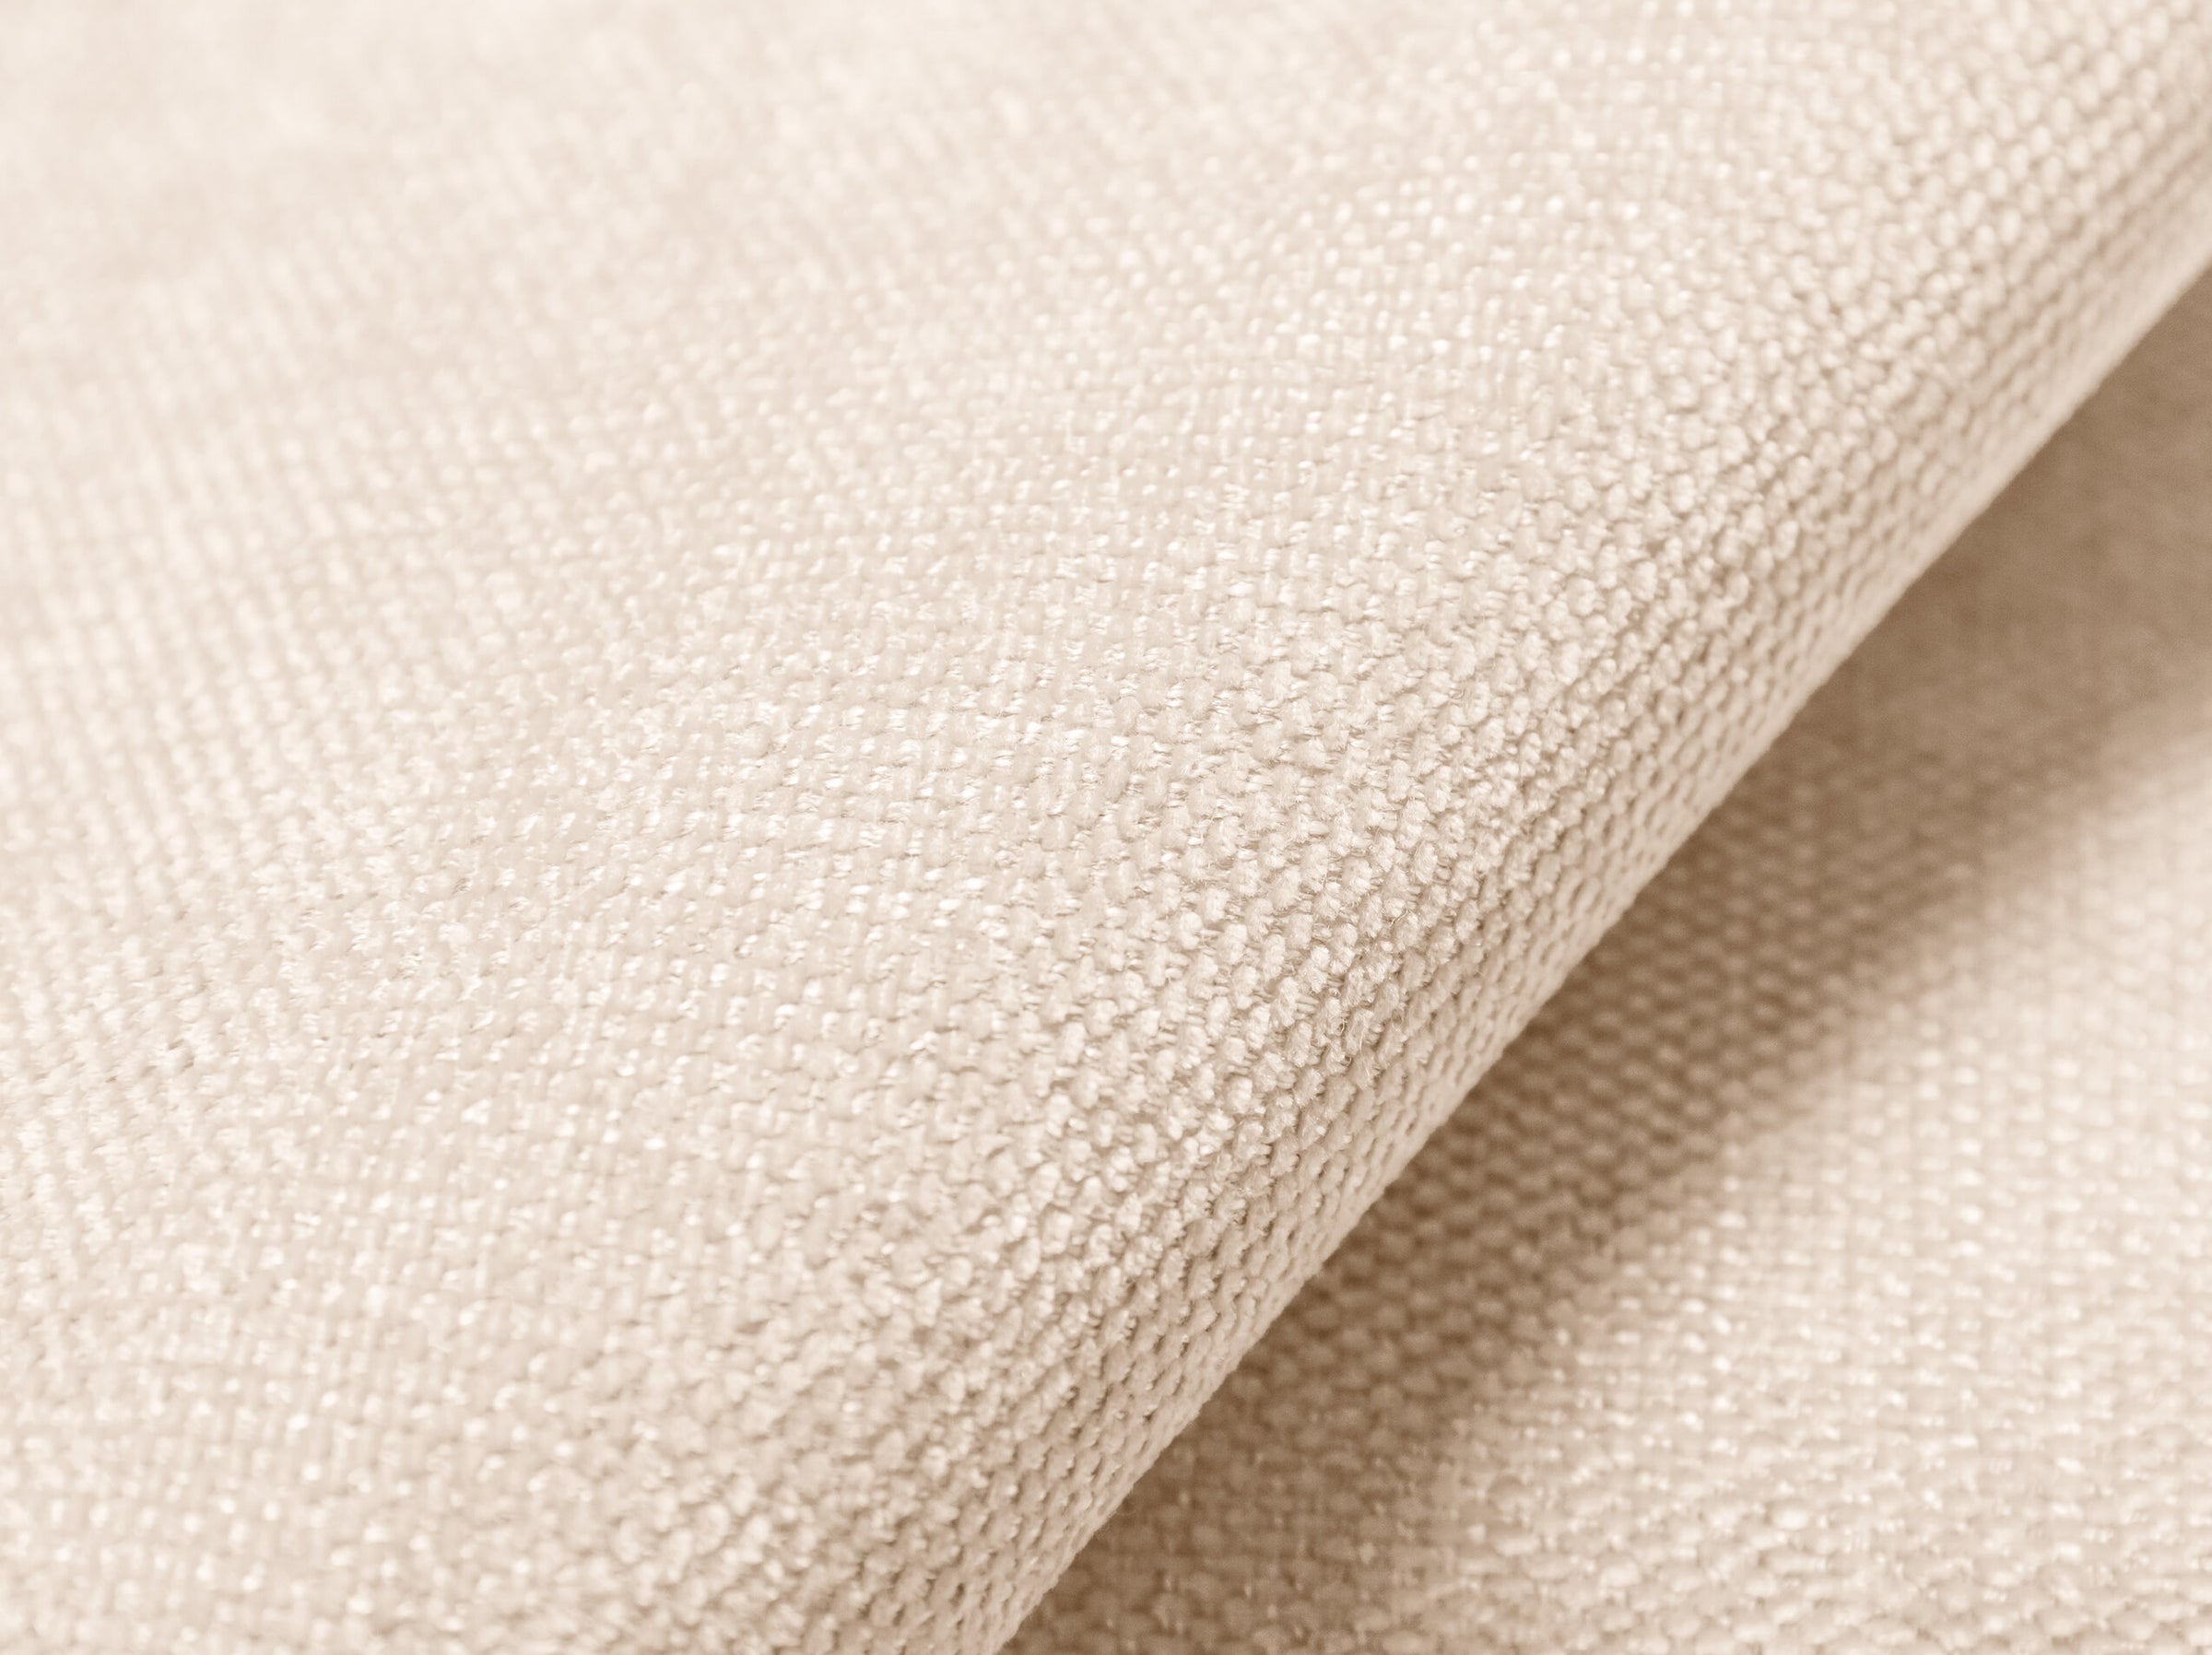 Agawa Structured fabric (Ros451) / Light beige 4